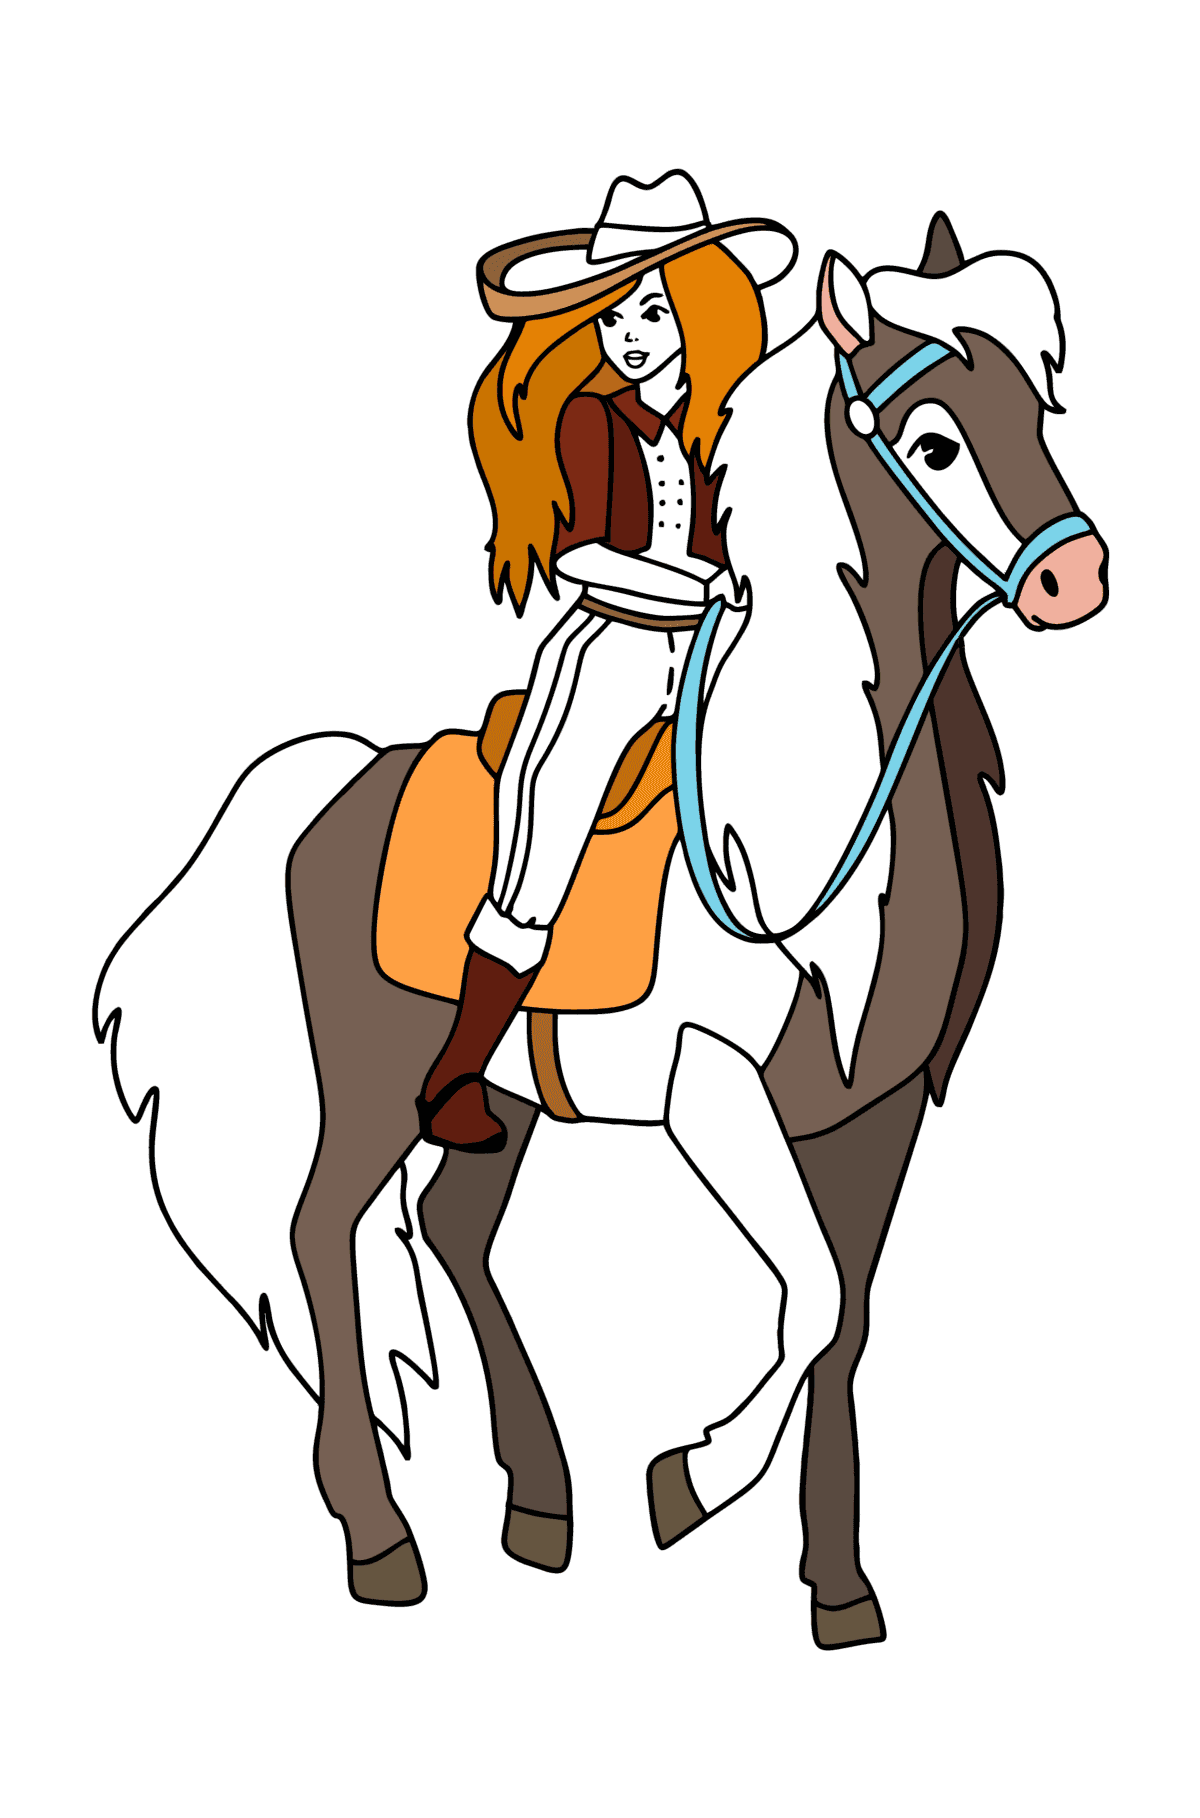 Girl on horse сoloring page - Coloring Pages for Kids